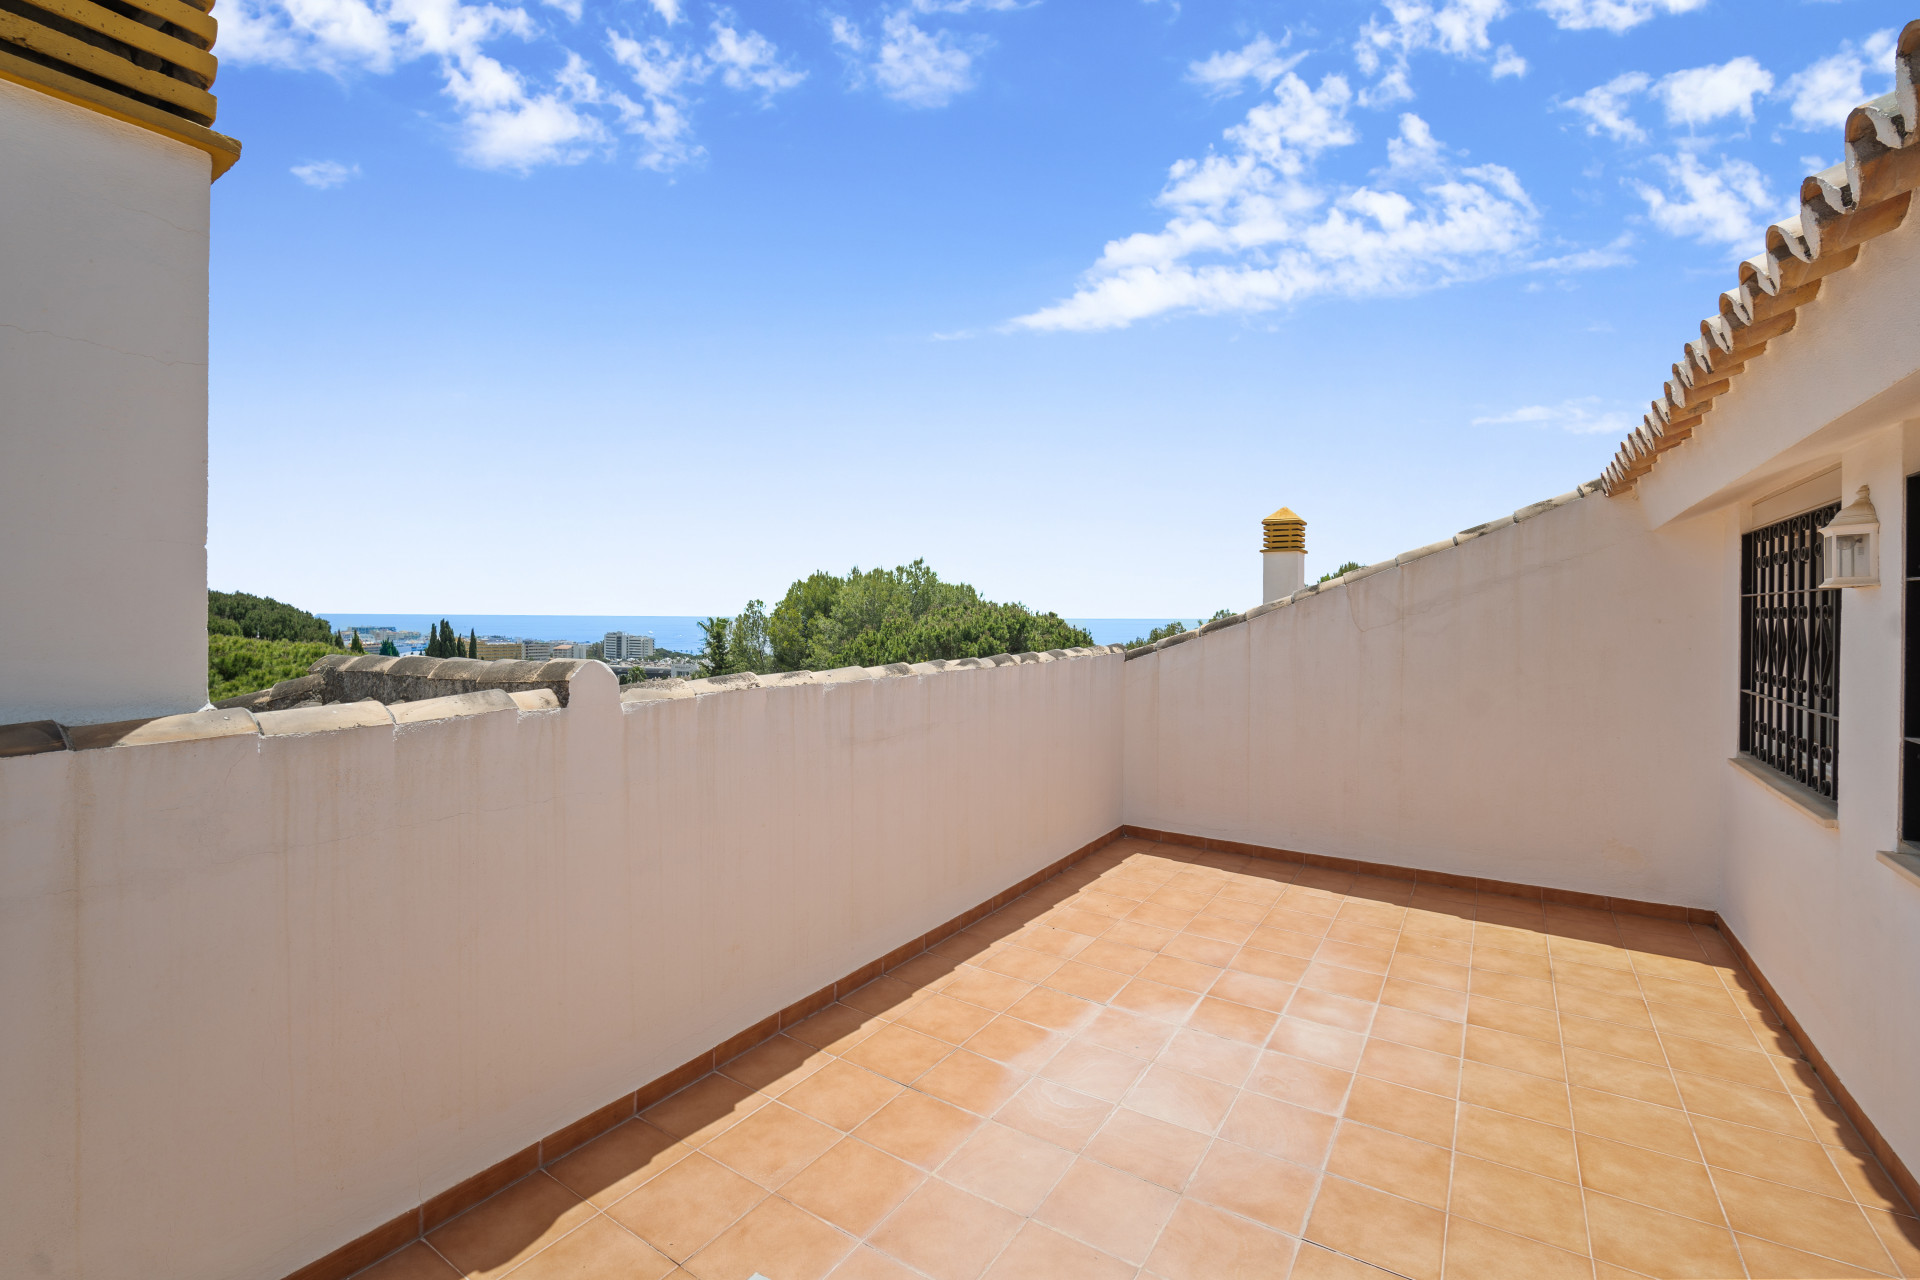 Superb three bedroom, south east facing duplex penthouse in the gated urbanisation Los Pinos de Nagueles on Marbella’s Golden Mile